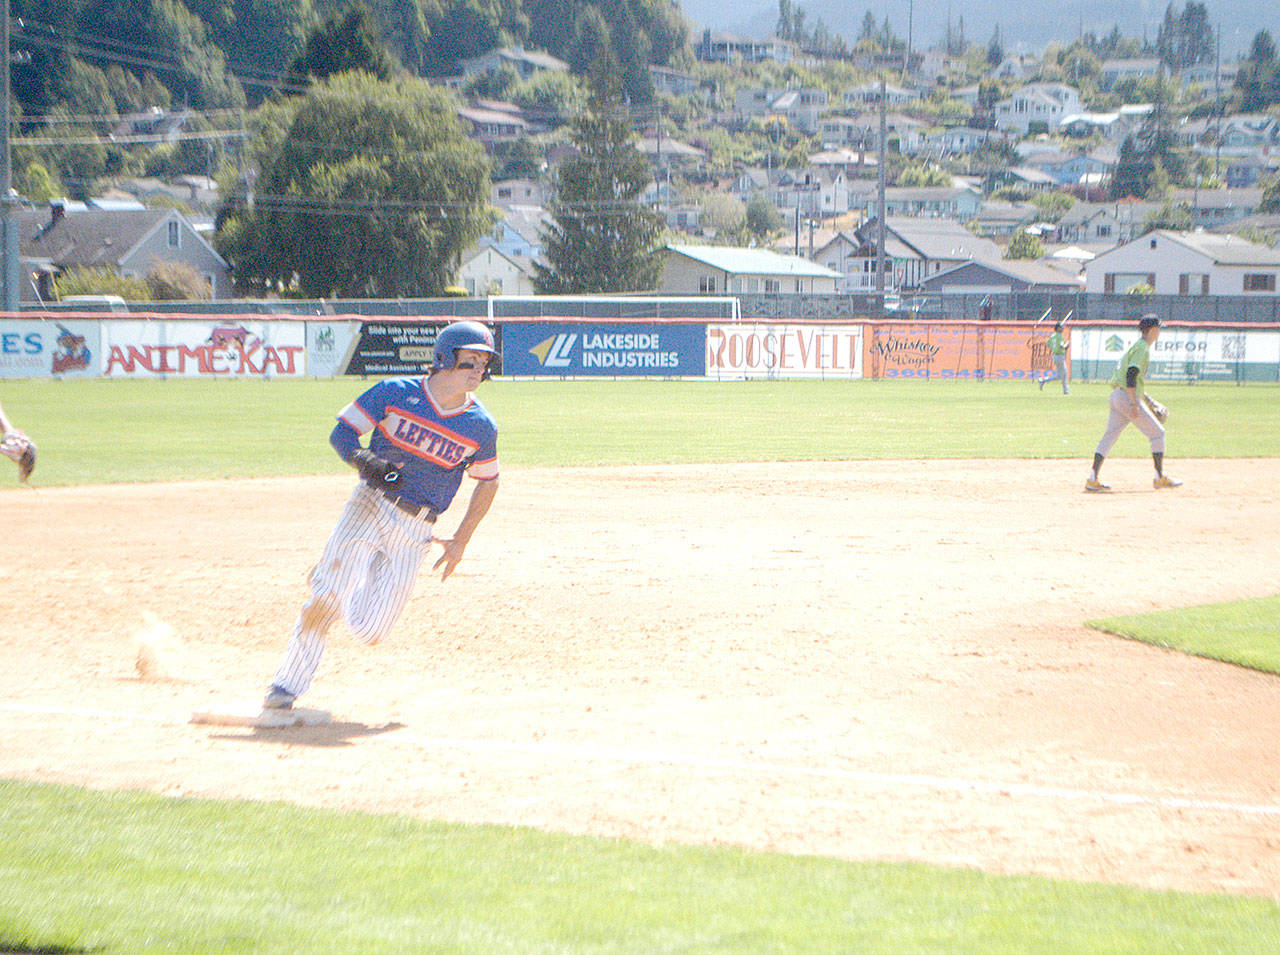 The Lefties’ Nick Oakley rounds third base Sunday at Civic Field on his way to score on a double by Nathan Chong. (Pierre LaBossiere/Peninsula Daily News)